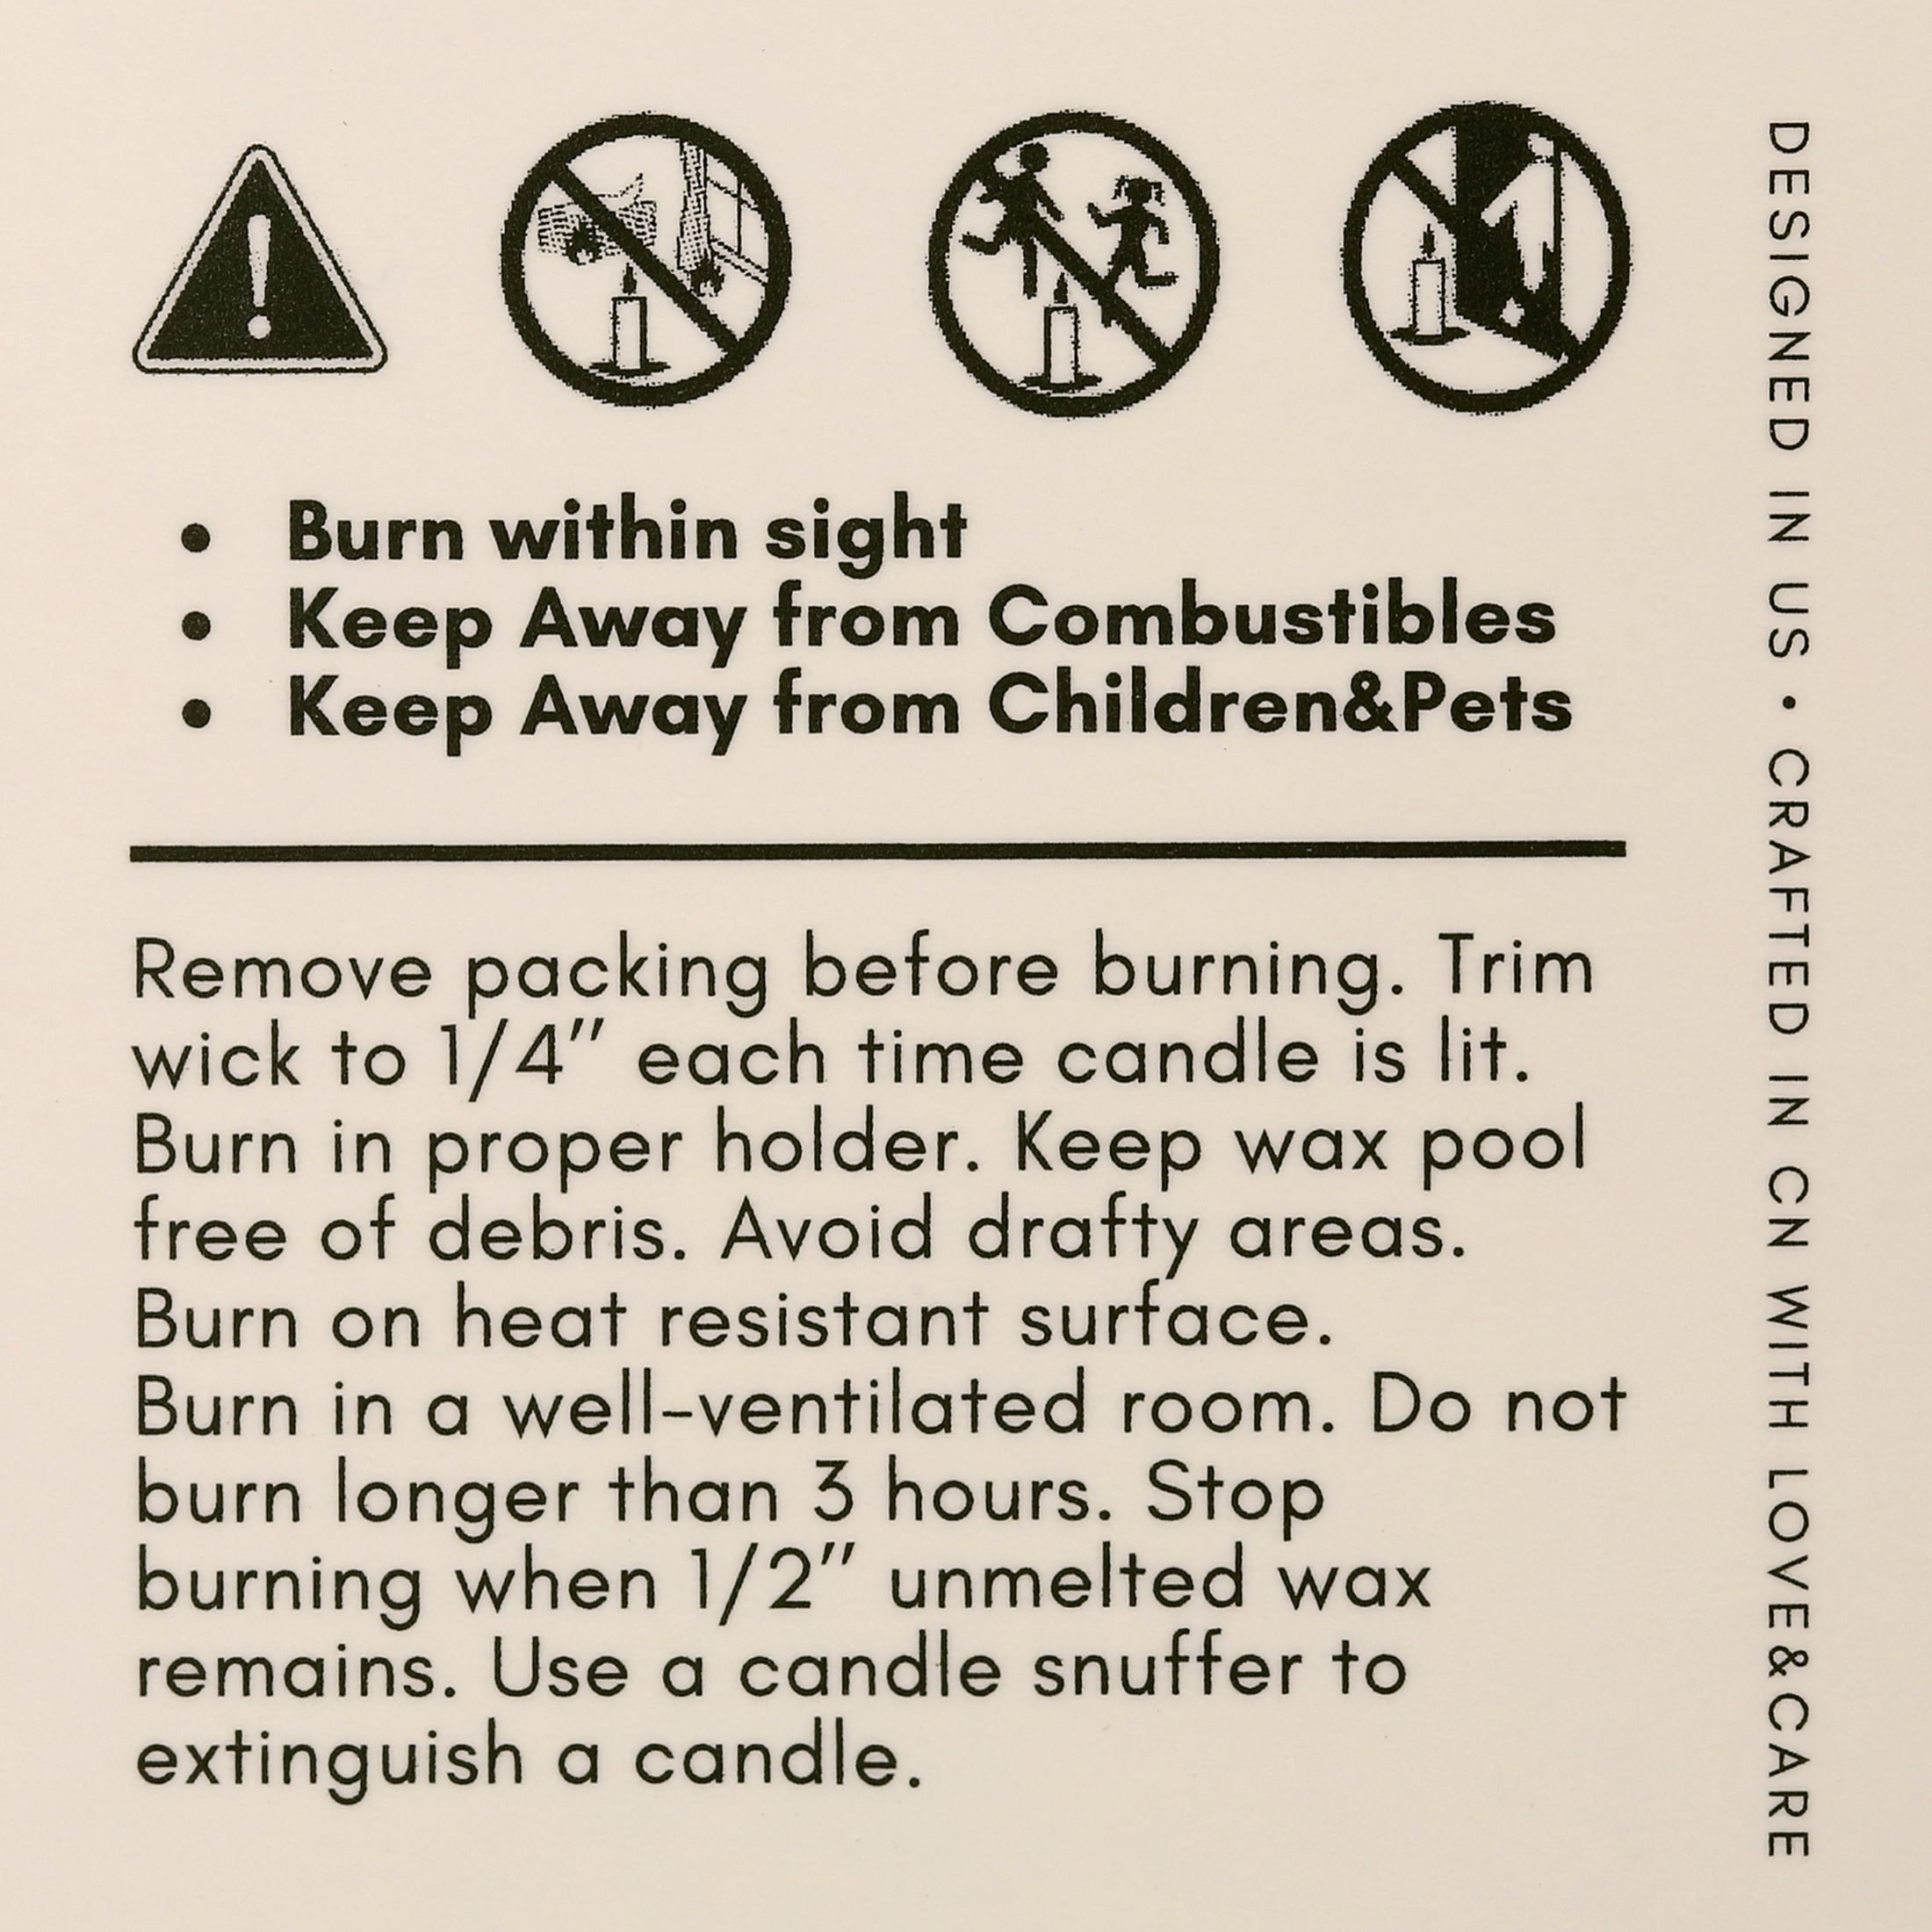 Candle Warning Label Template v2